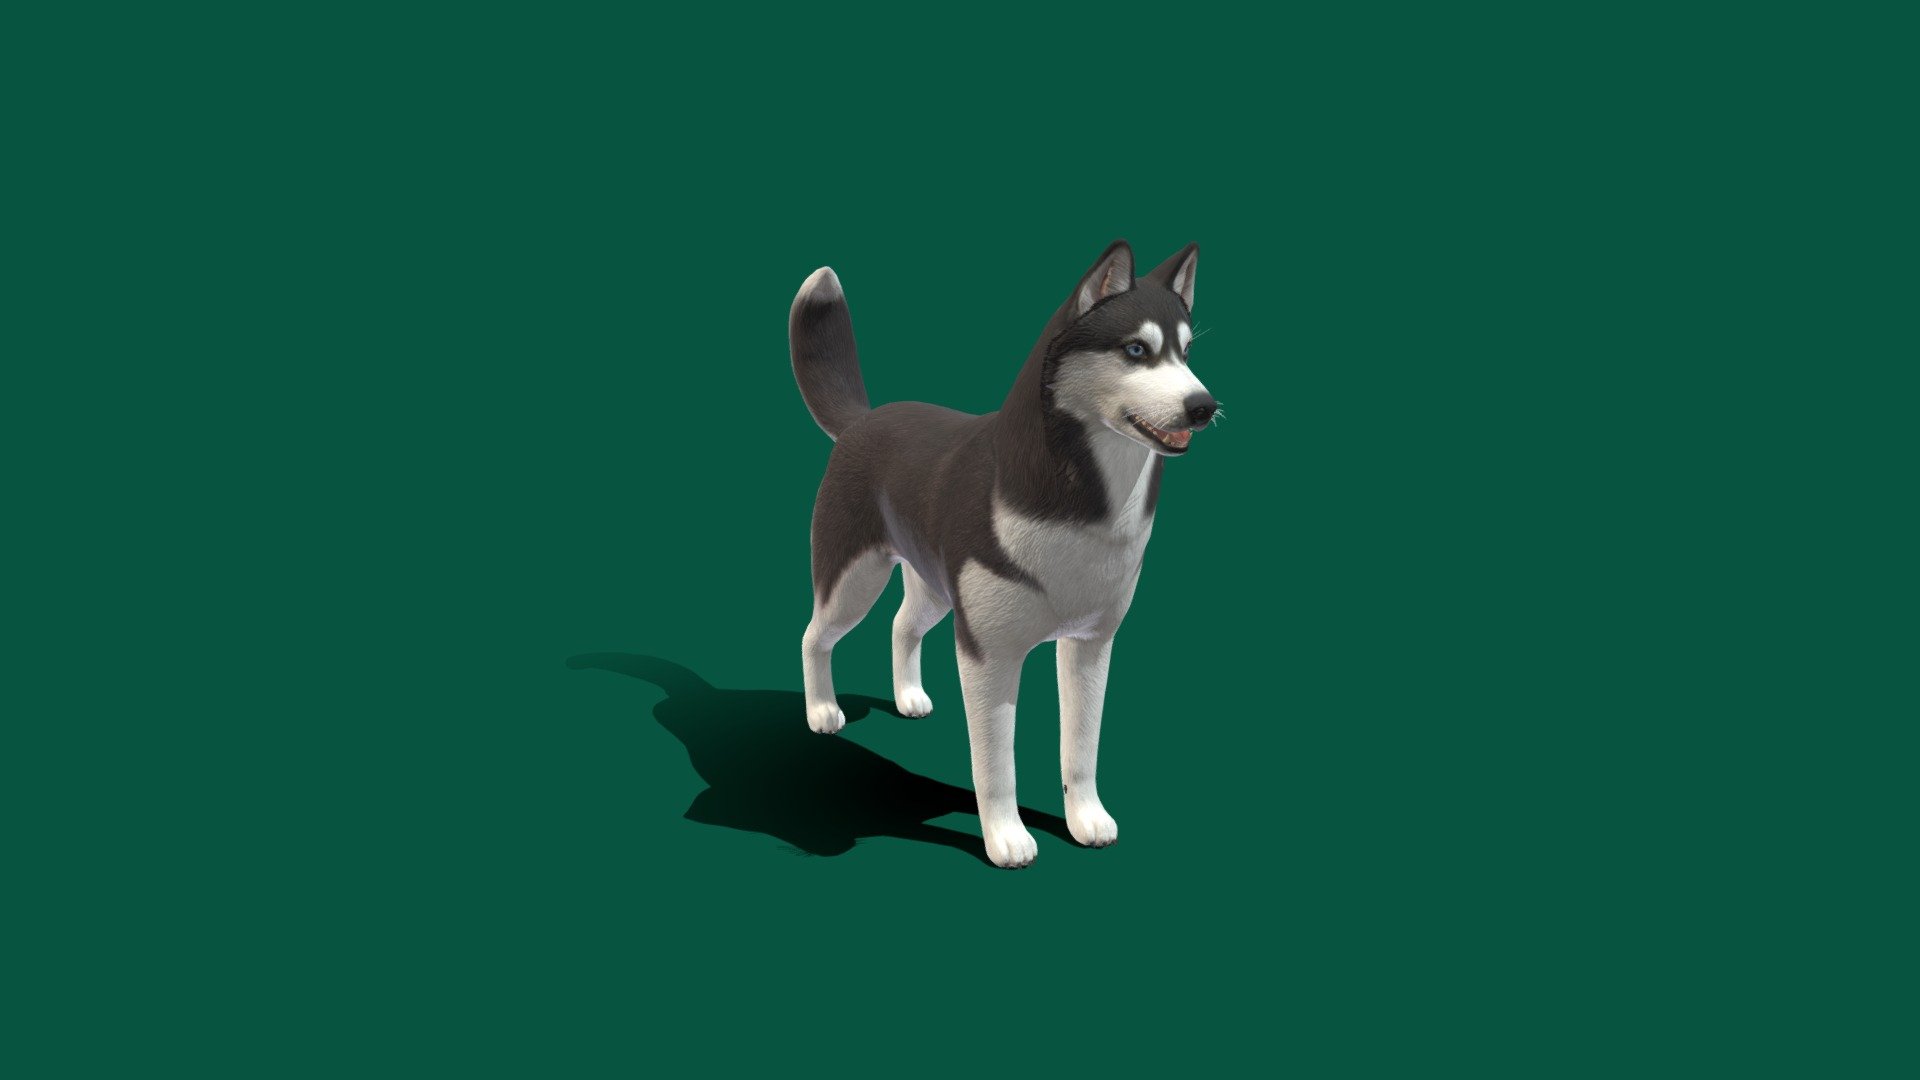 Side_Projects For GPU 😂 

The Siberian Husky is a medium-sized working sled dog breed. The breed belongs to the Spitz genetic family. It is recognizable by its thickly furred double coat, erect triangular ears, and distinctive markings, and is smaller than the similar-looking Alaskan Malamute. Wikipedia
Life span: 12 – 15 years
Origin: Siberia
Smaller version: Alaskan Klee Kai dogbreedinfo.com
Common nicknames: Husky; Sibe
Temperament: Outgoing, Friendly, Intelligent, Alert, Gentle
Weight: Female: 35–51 lbs (16–23 kg), Male: 44–60 lbs (20–27 kg)
Colors: White, Black, Black &amp; Tan, Gray &amp; White, Silver-gray, Sable &amp; White, Black &amp; White, Red &amp; White, Grey - Huskey_Game_Ready - 3D model by Nyilonelycompany 3d model